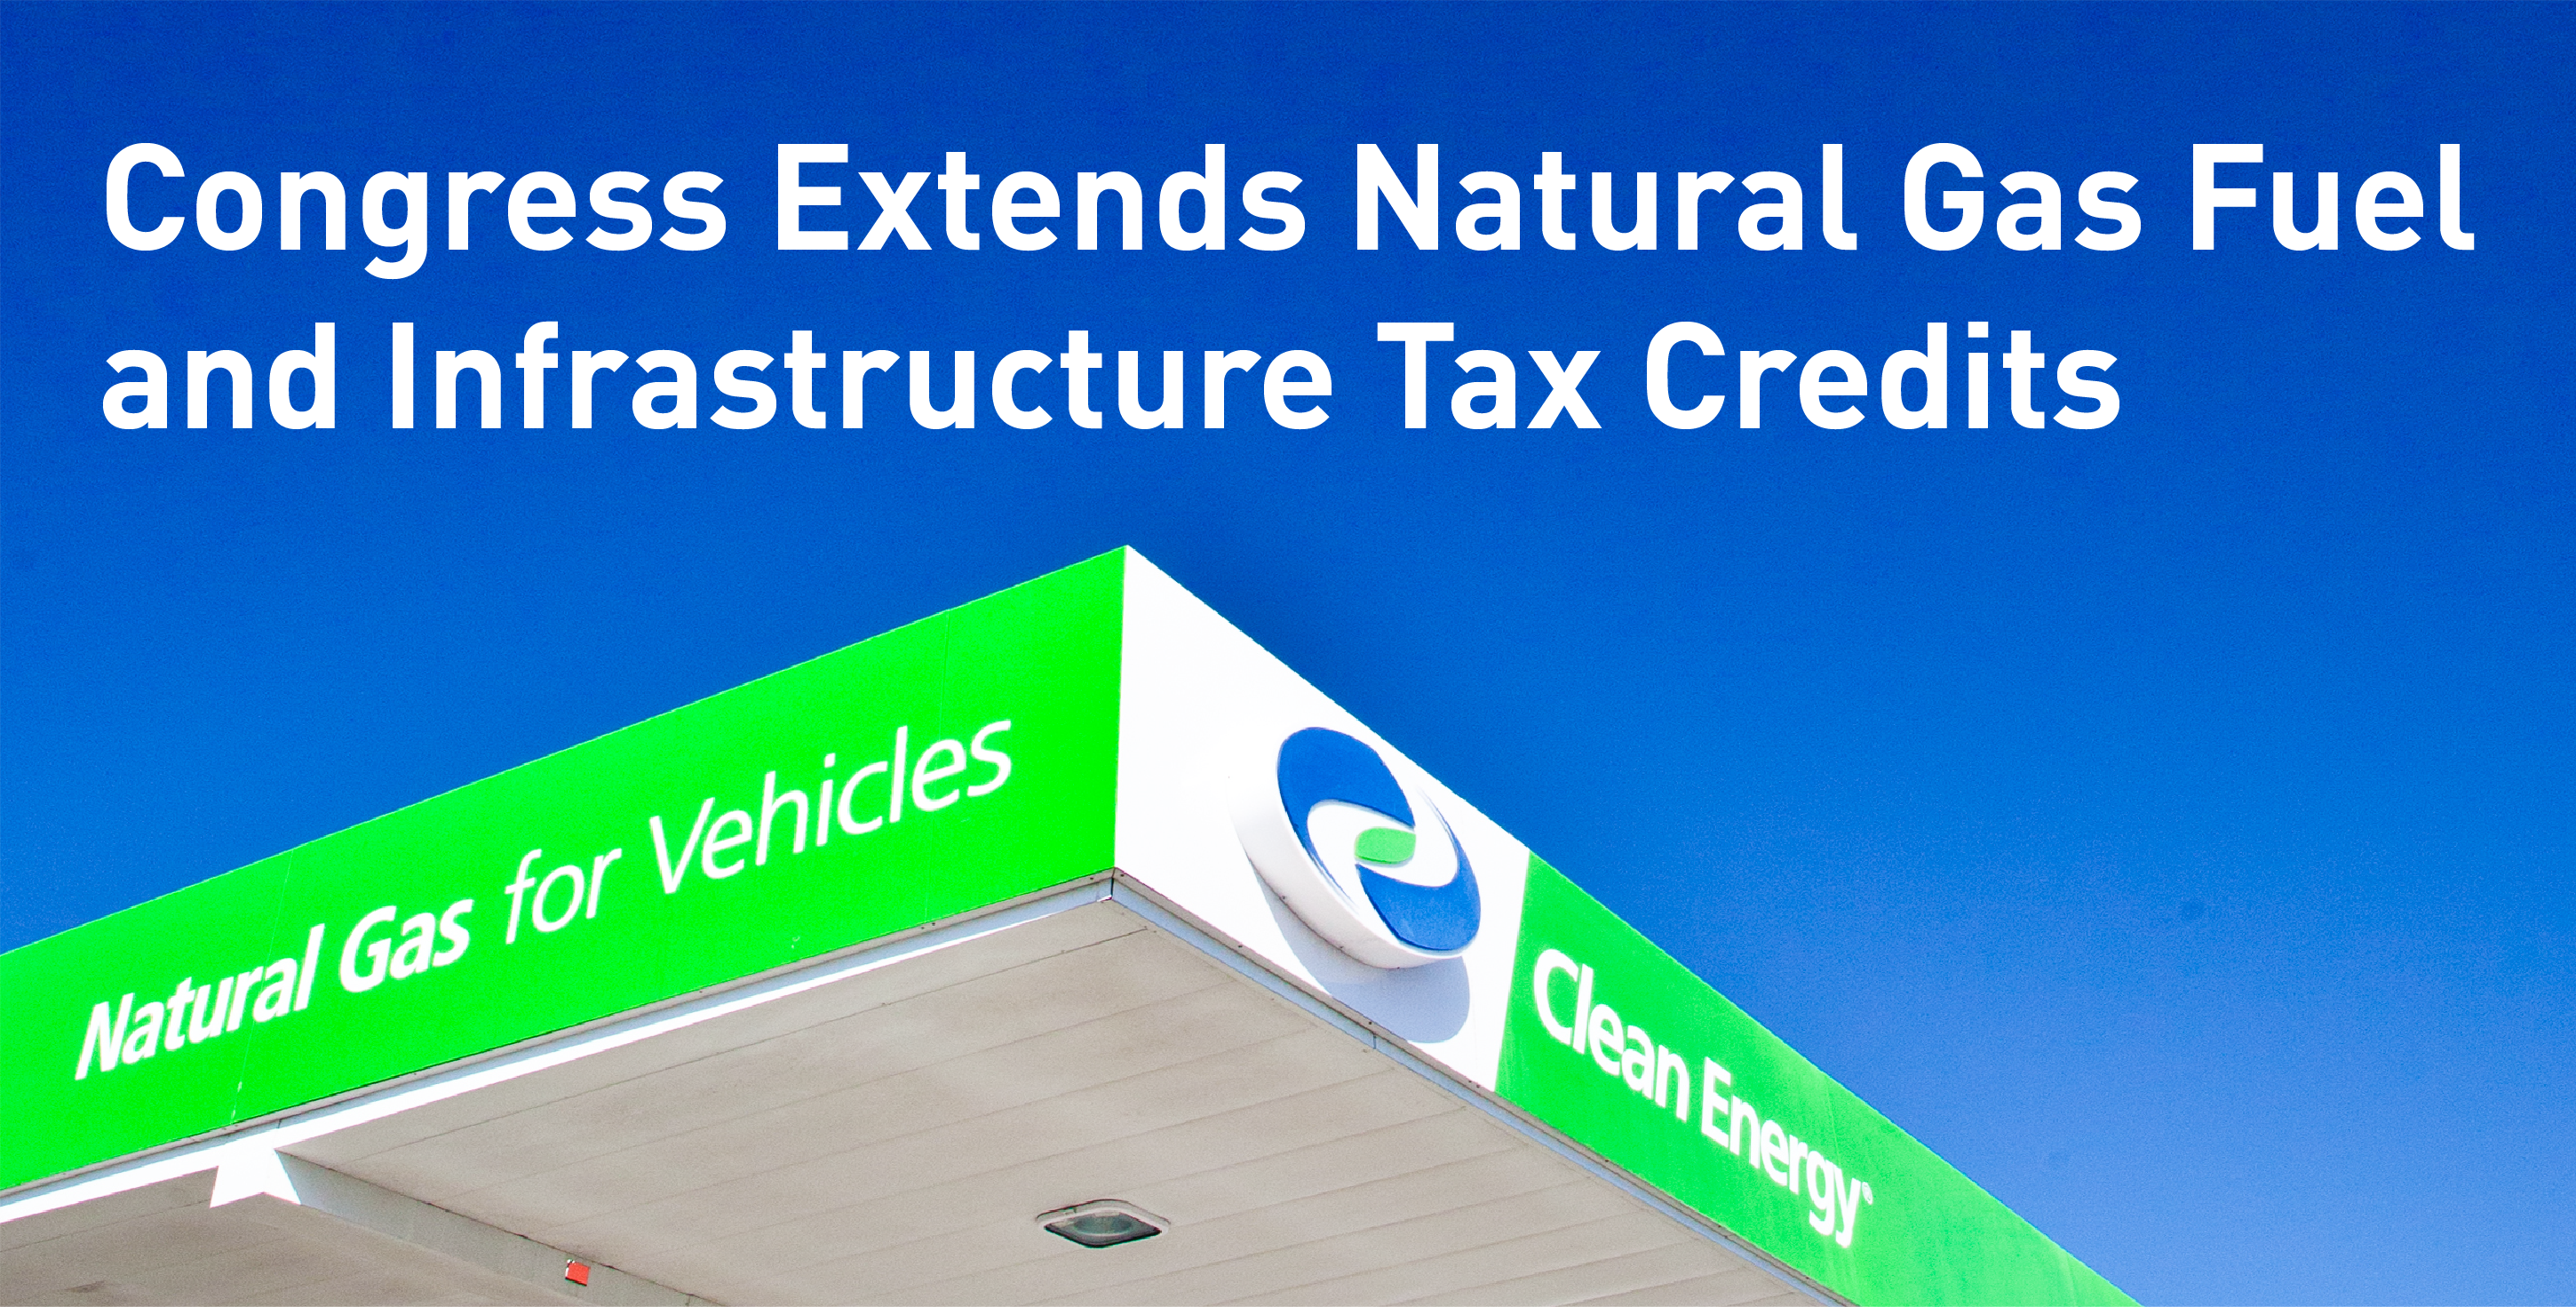 Congress Extends Natural Gas Fuel and Infrastructure Tax Credits